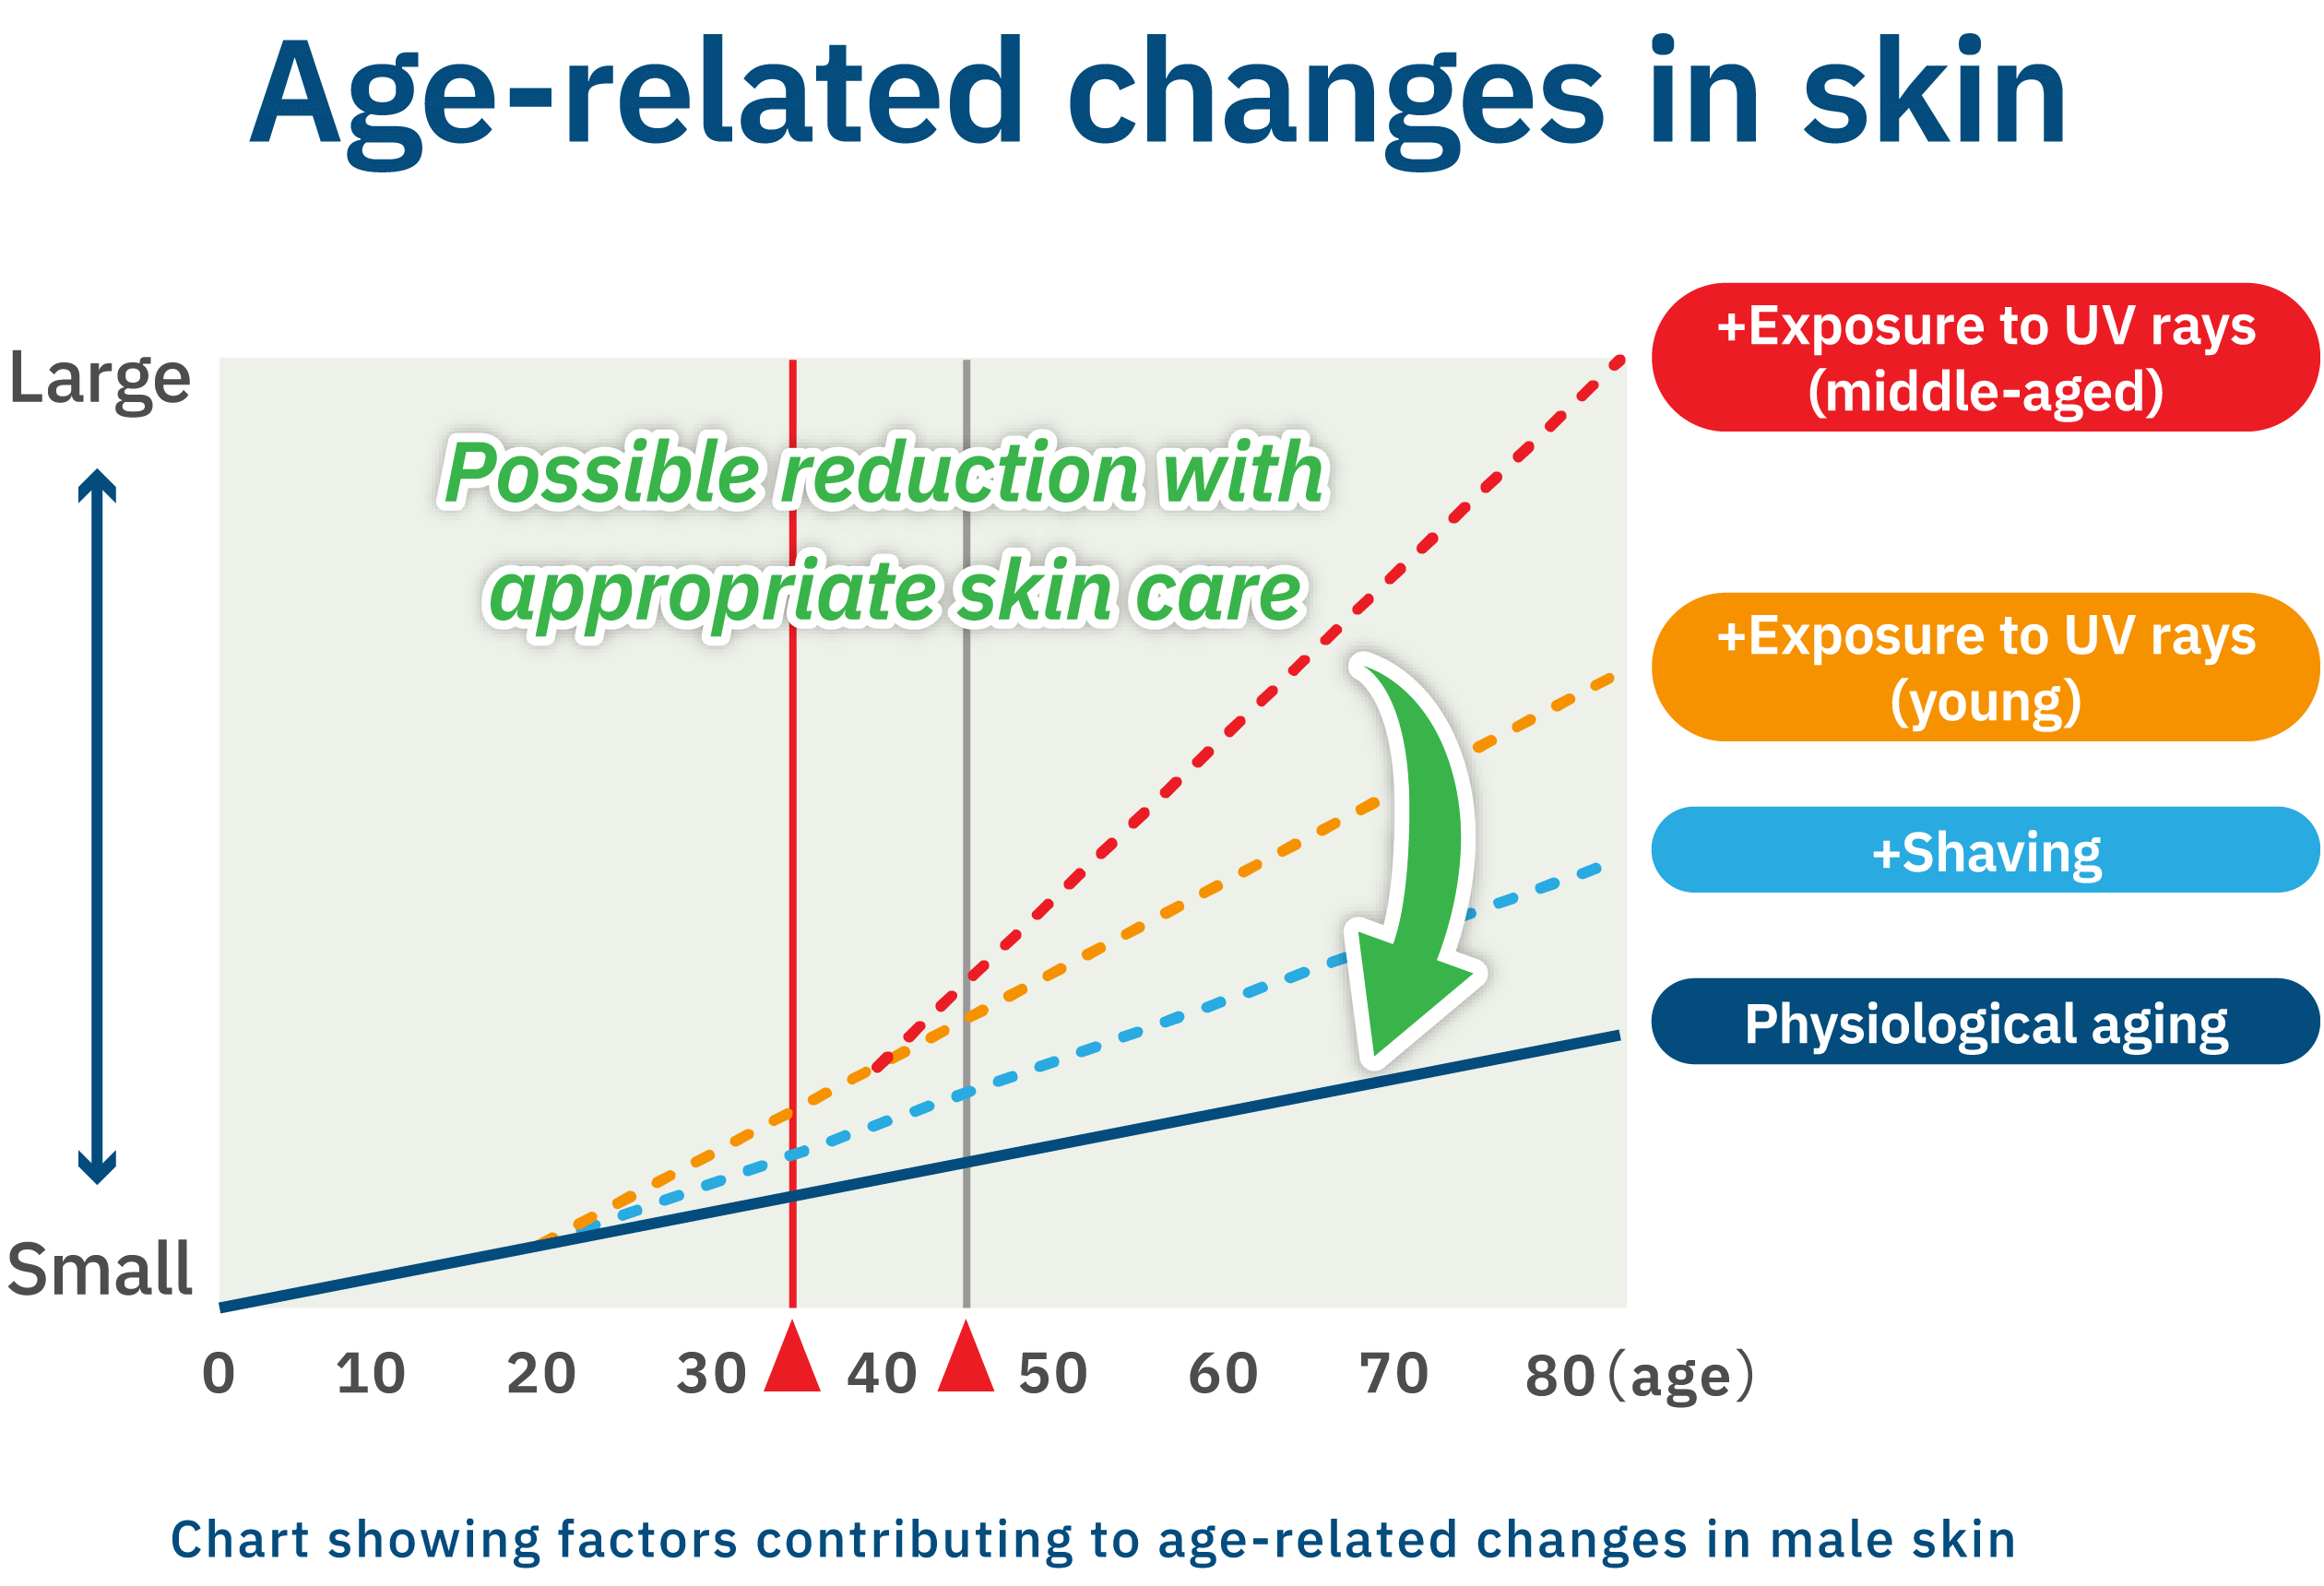 Chart showing factors contributing to age-related changes in male skin